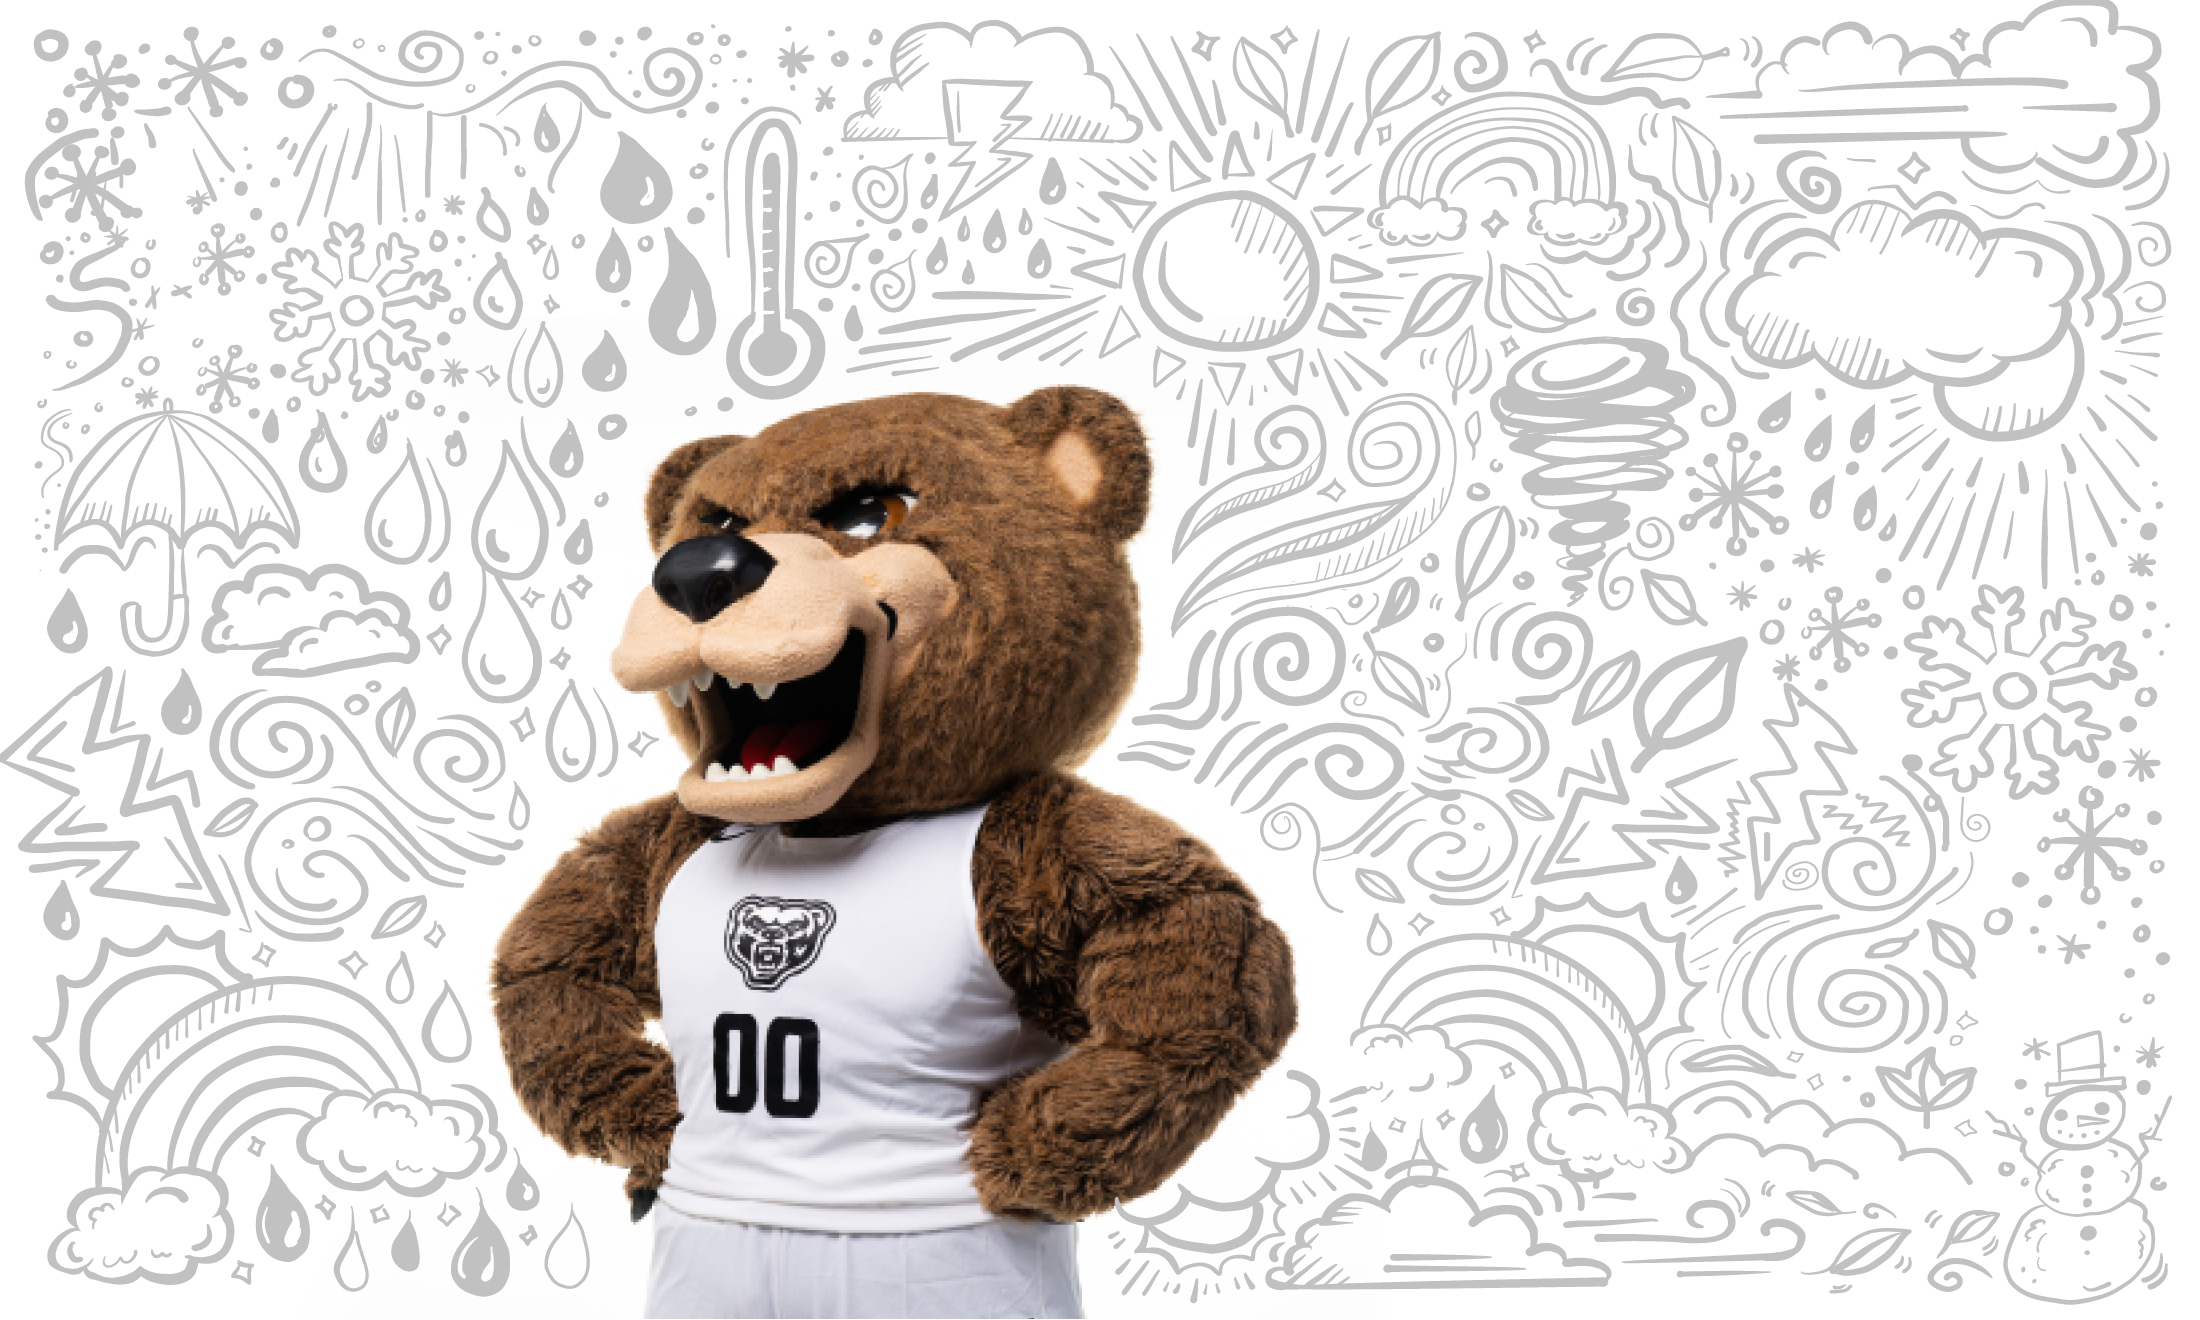 Grizz bear standing in front of illustration of weather graphics